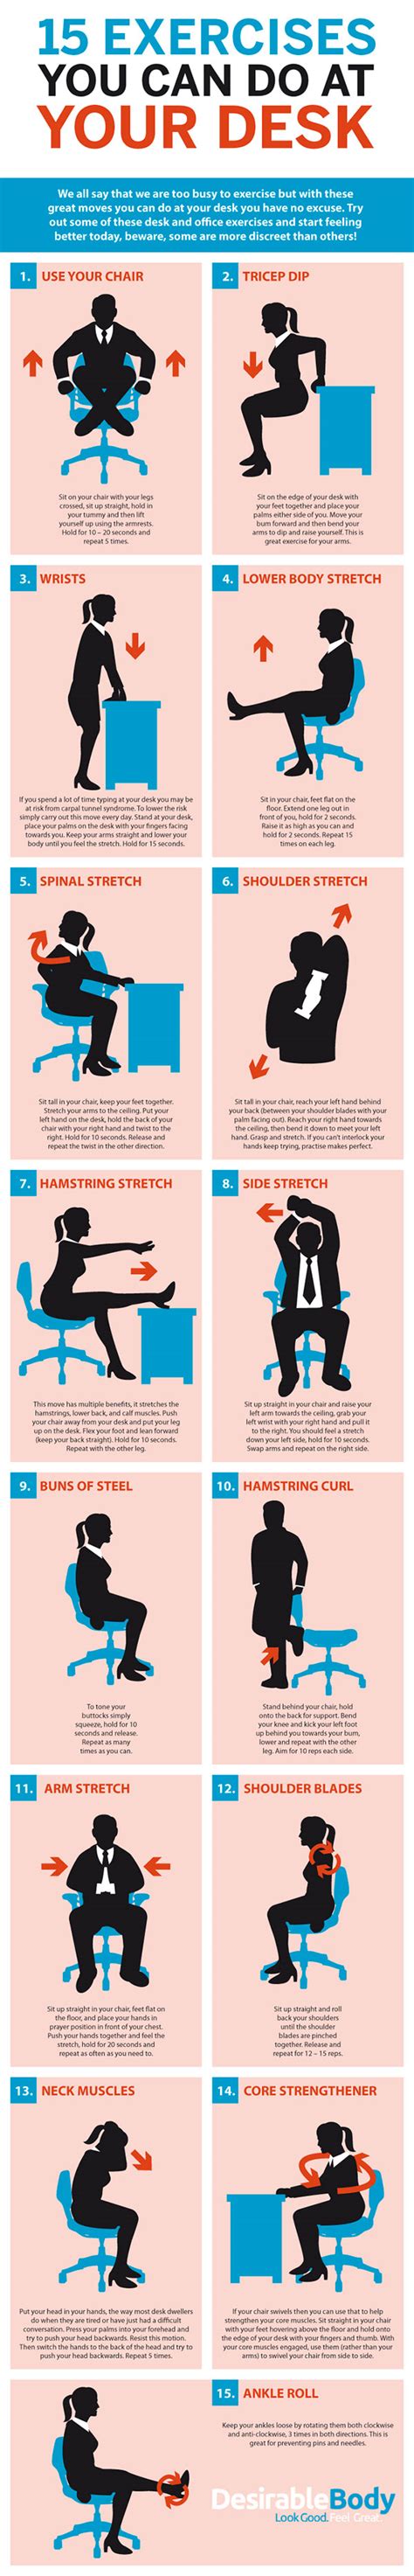 Deskercise 15 Simple Exercises You Can Do At Your Desk